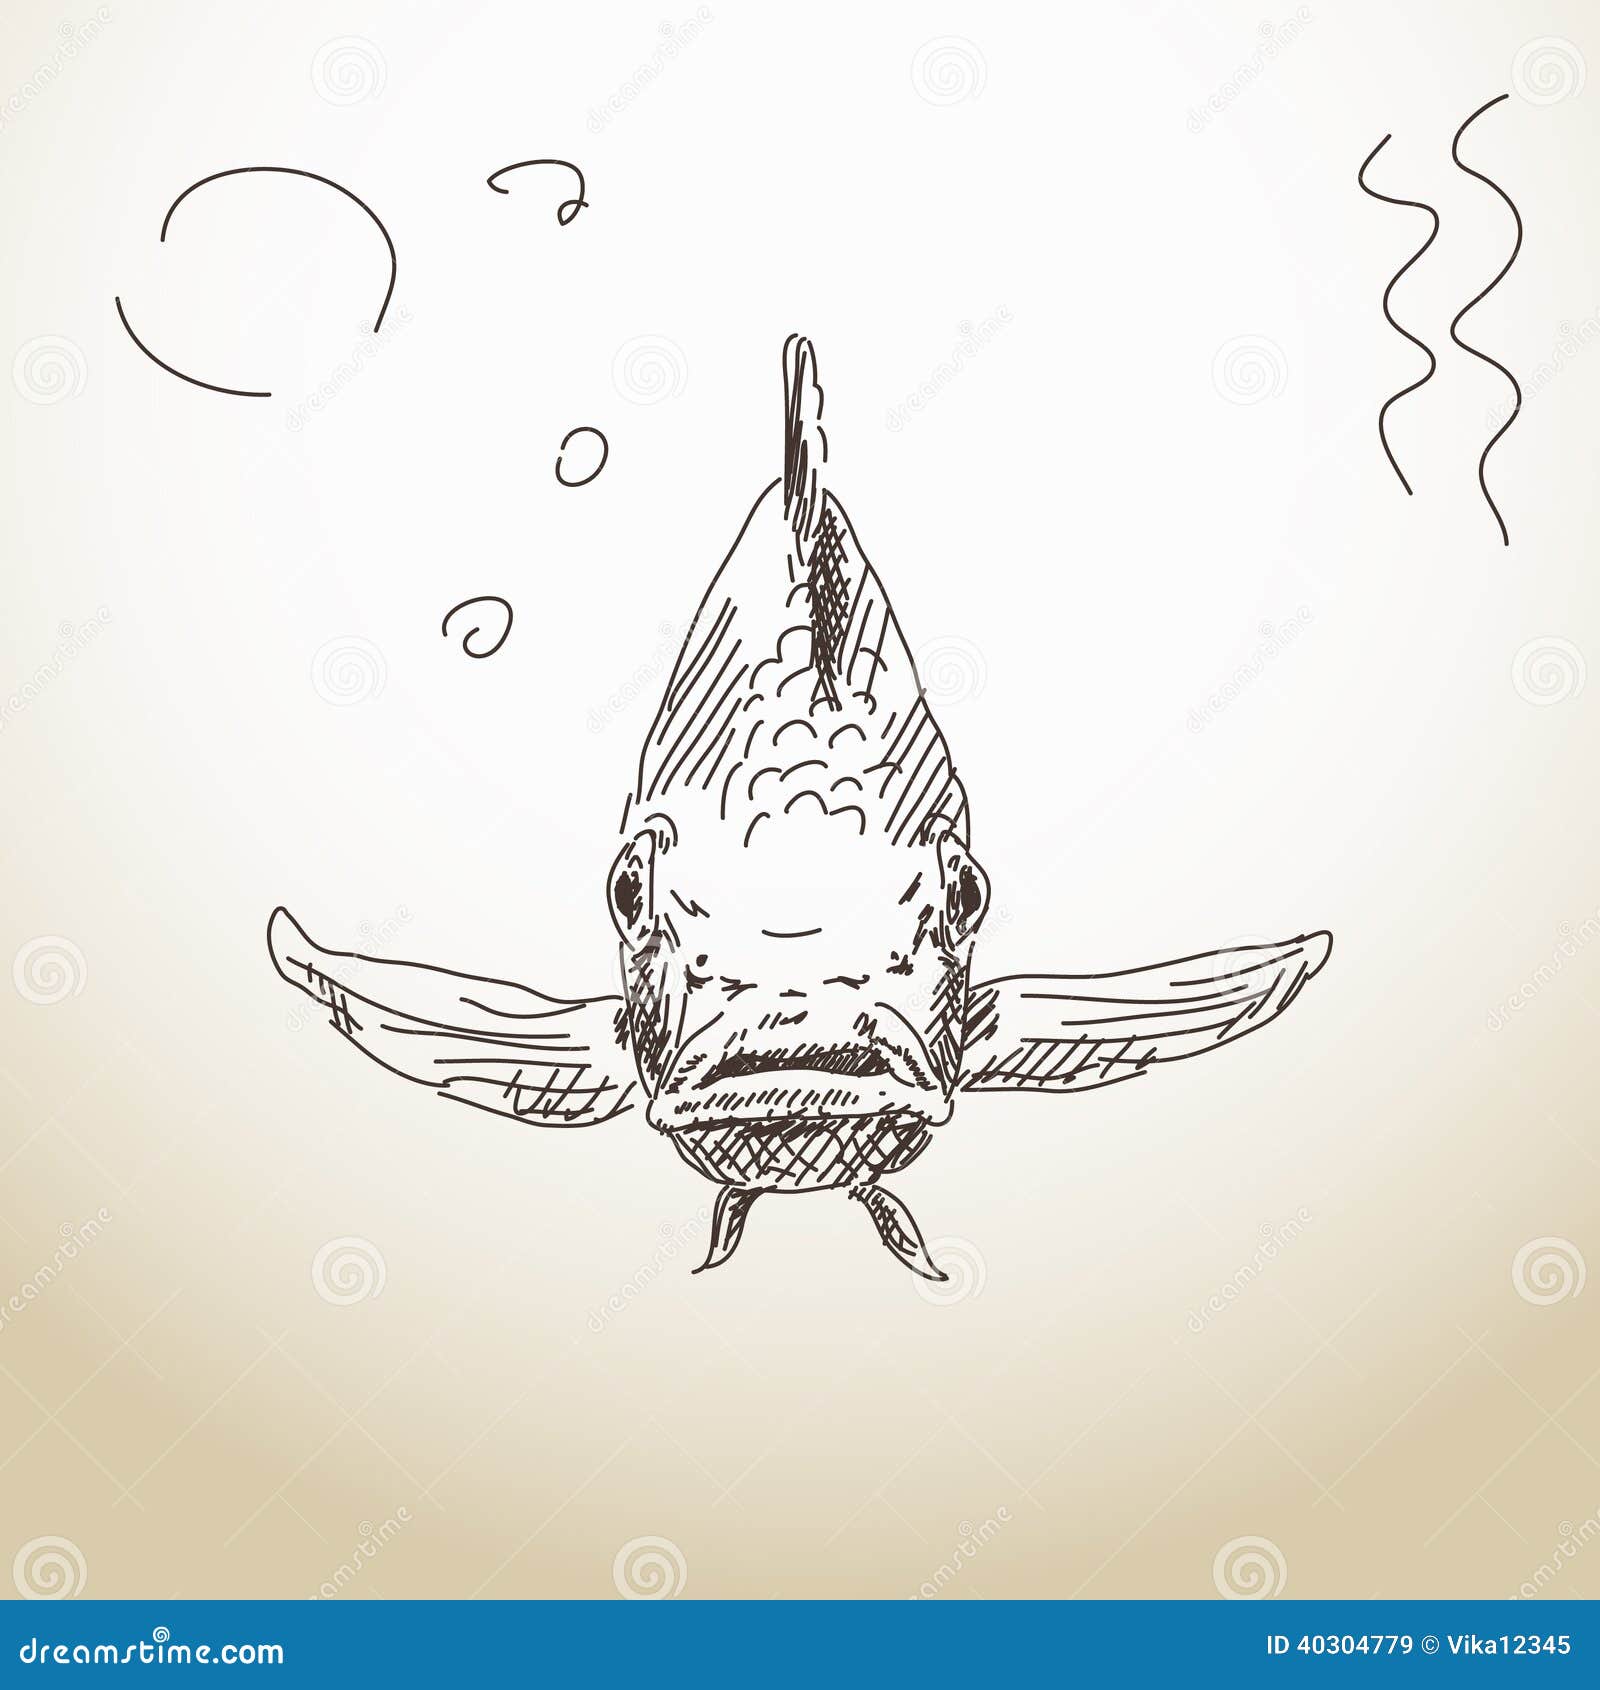 Fish front view stock vector. Illustration of sketch - 40304779